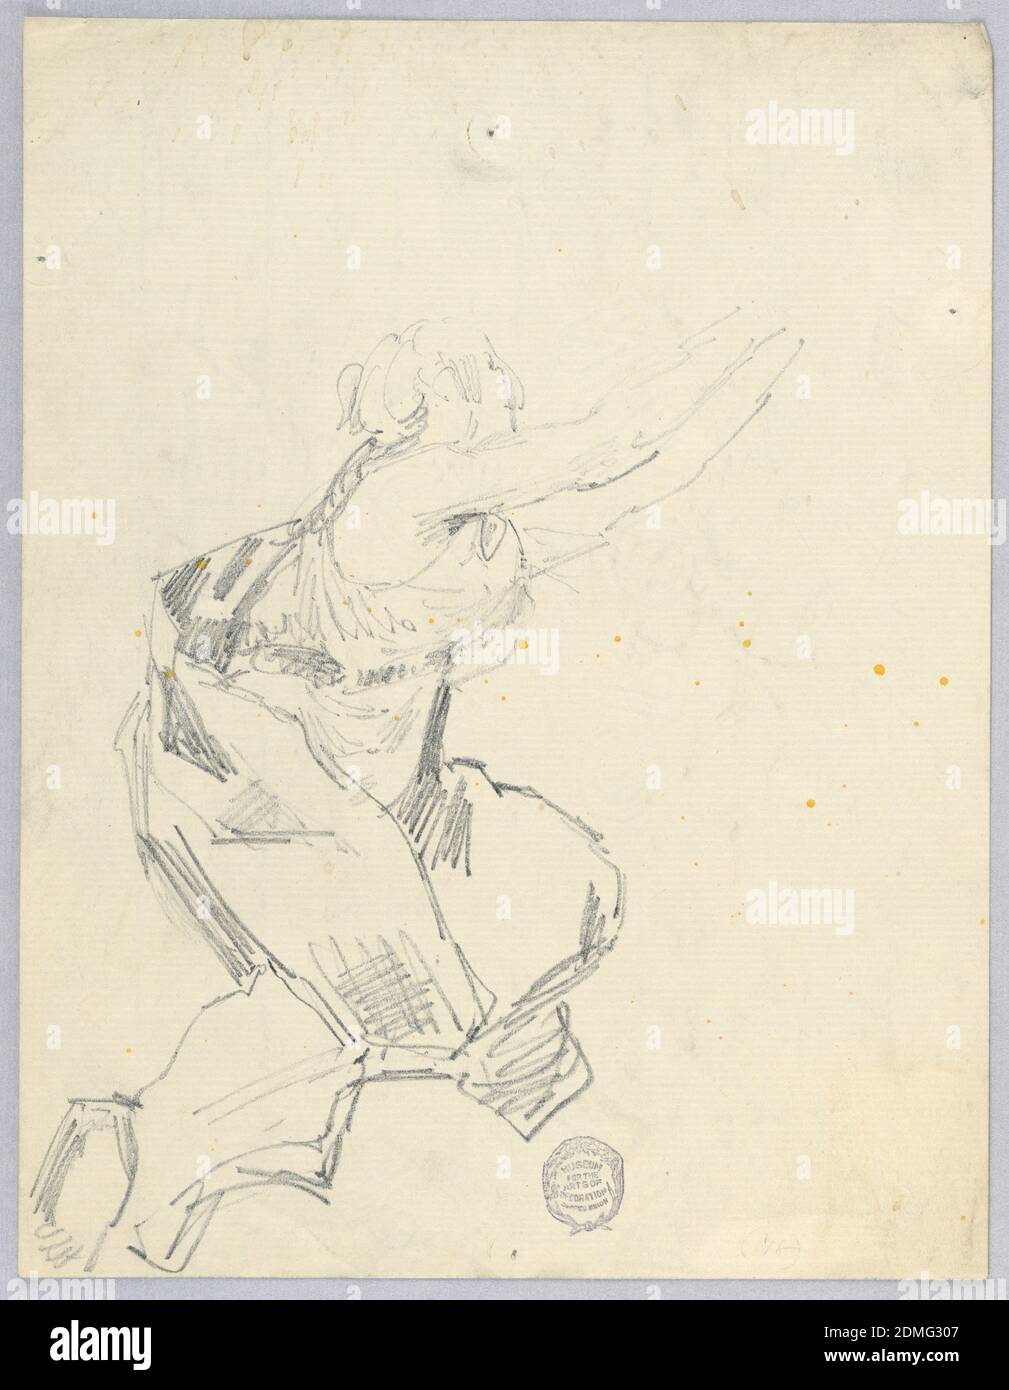 Sketch of a Woman, Francis Augustus Lathrop, American, 1849 - 1909, Graphite on laid paper, Female figure in a supplicant posture, arms upstretched to the right., USA, ca. 1895, figures, Drawing Stock Photo